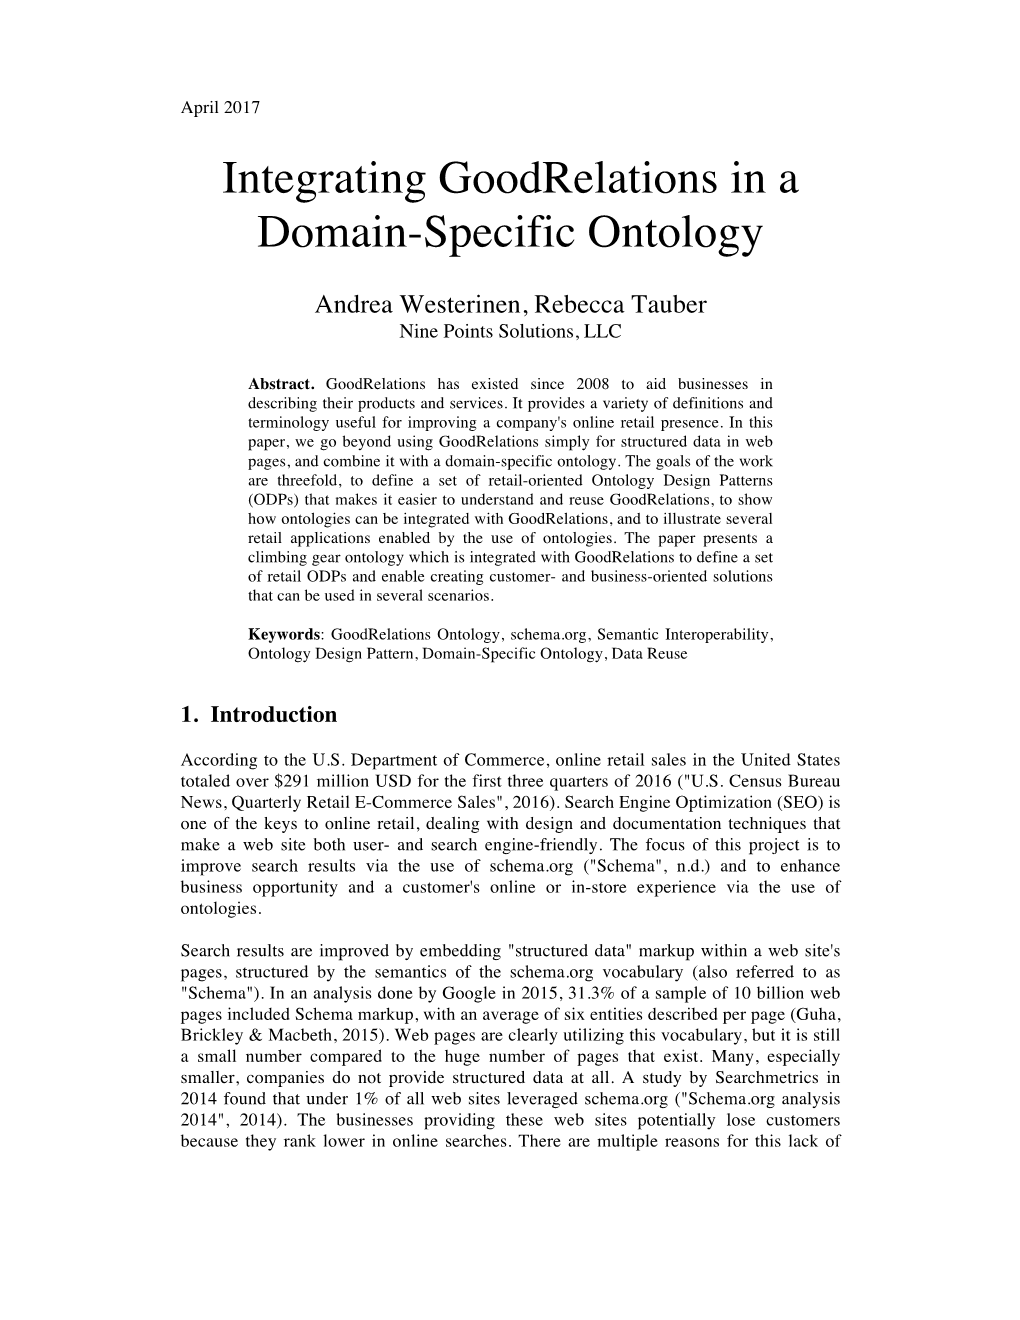 Integrating Goodrelations in a Domain-Specific Ontology